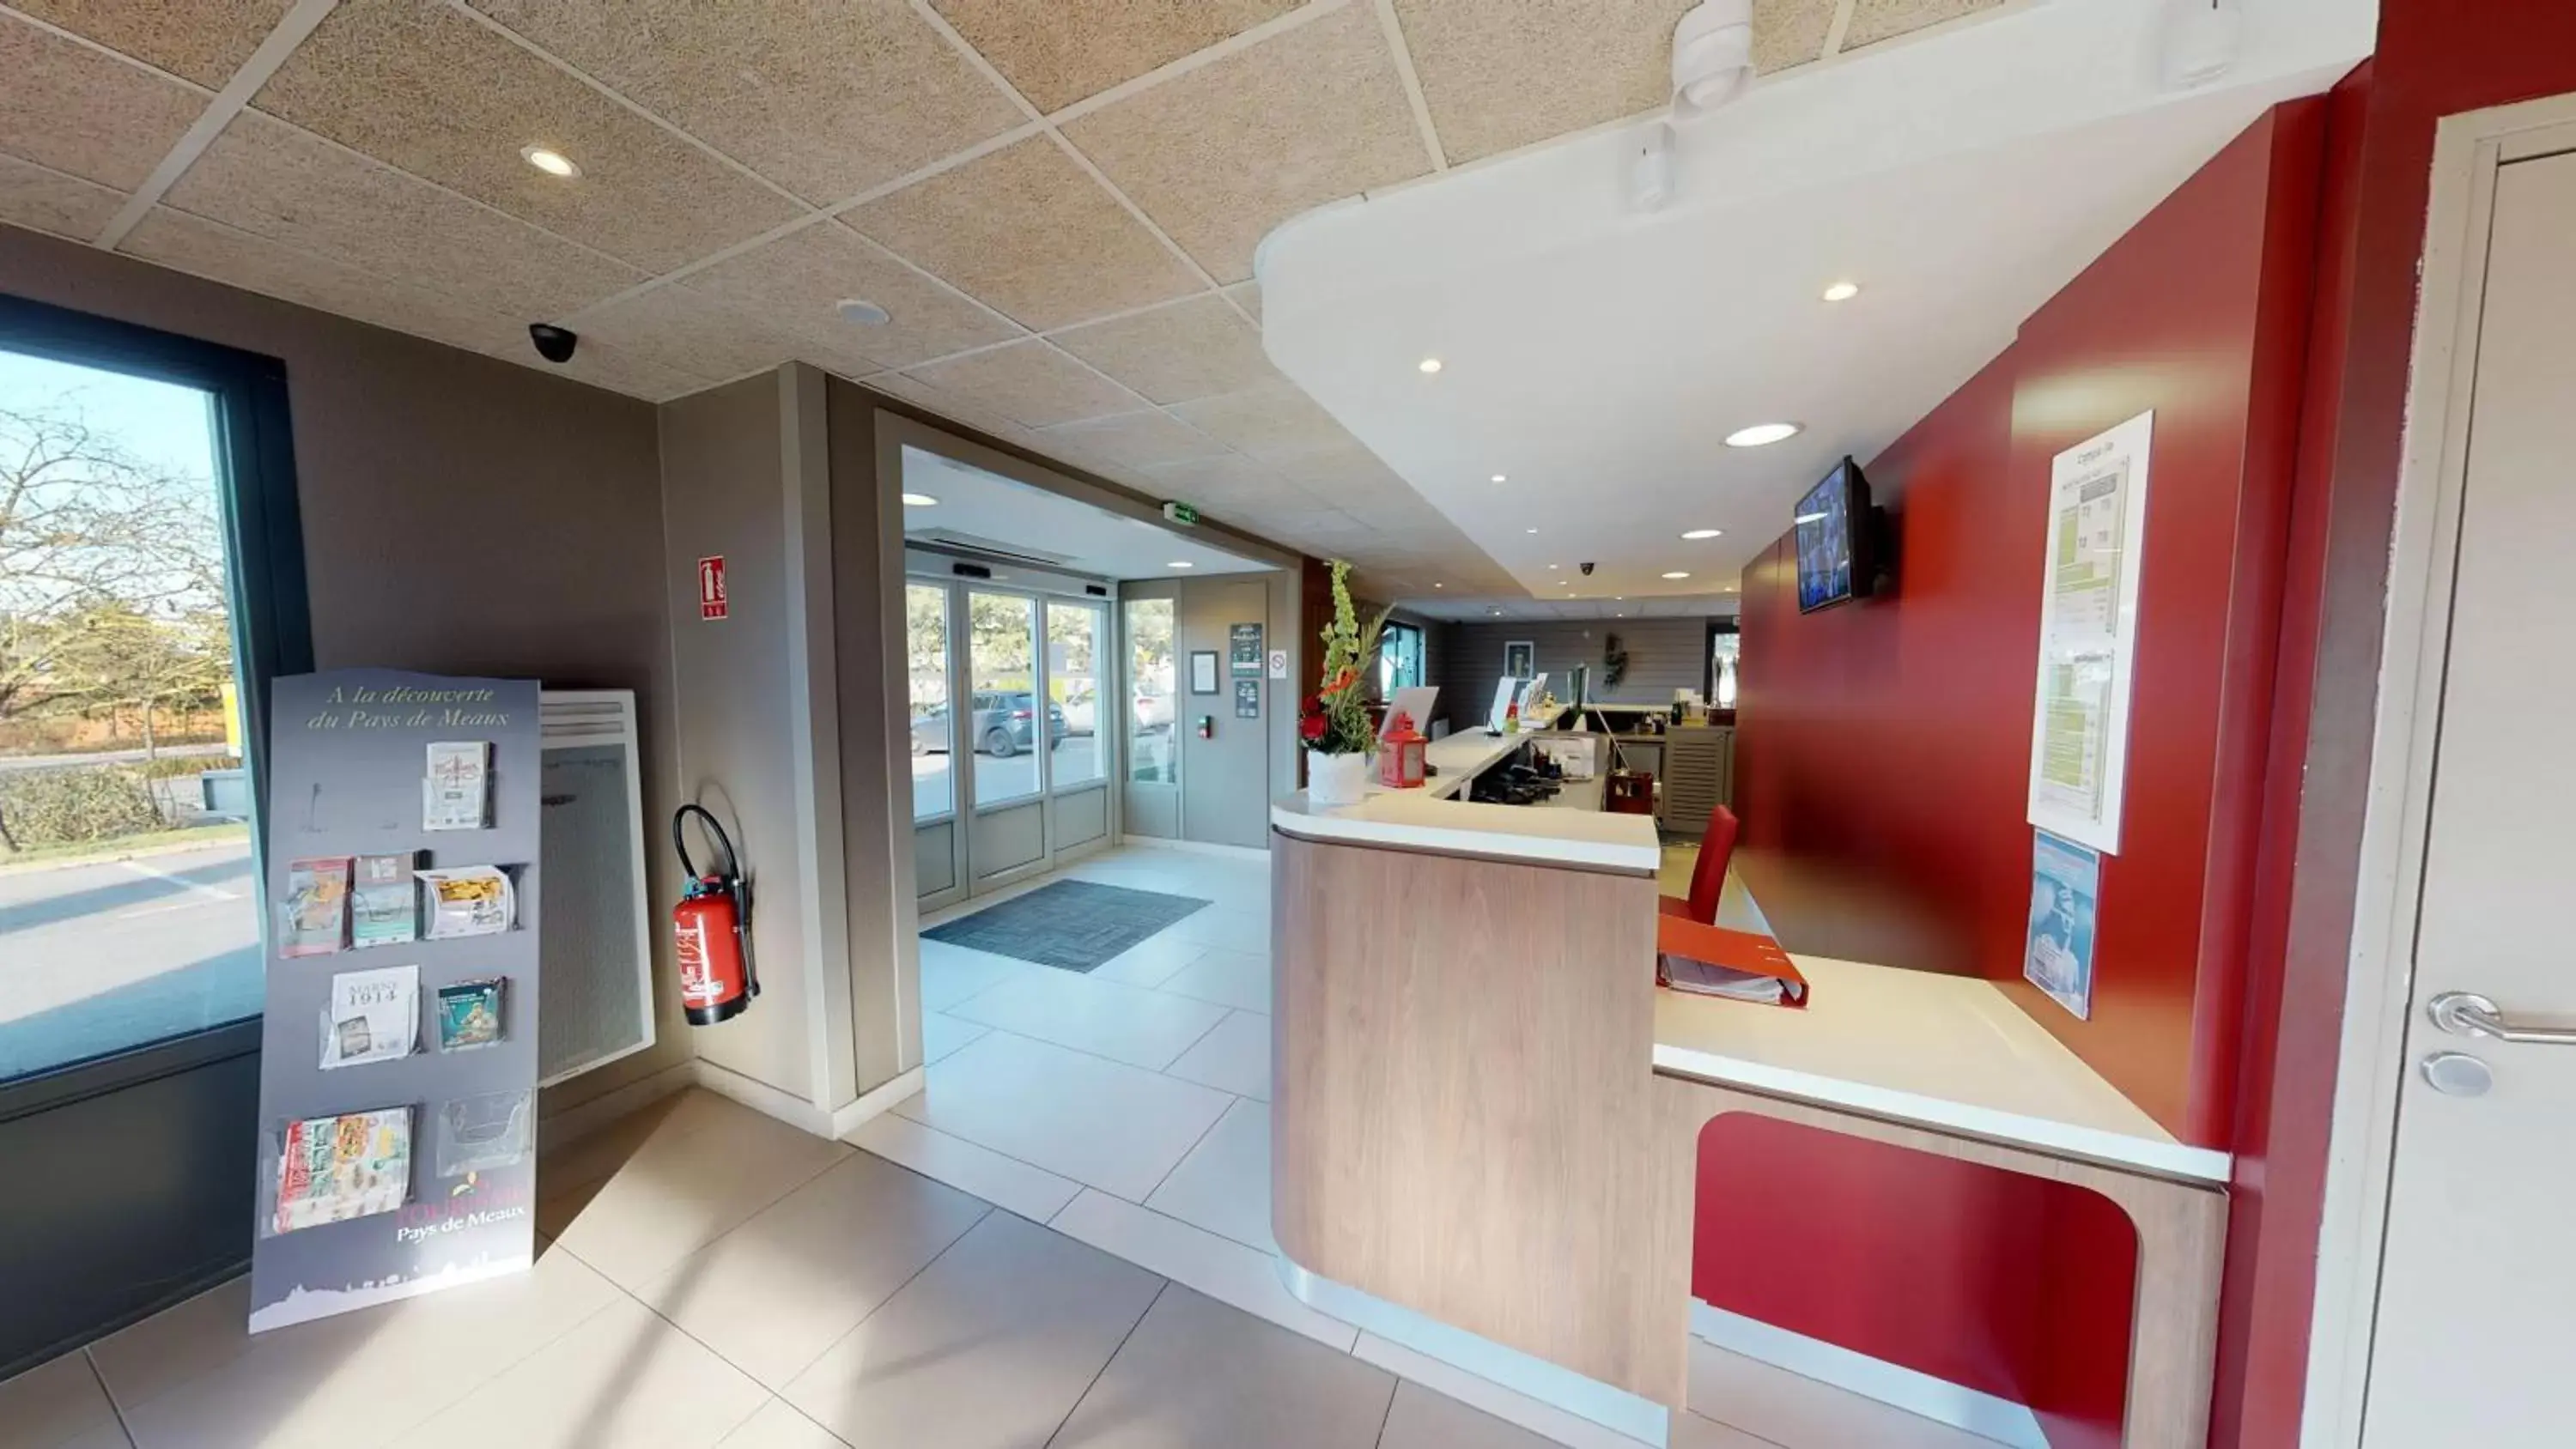 Banquet/Function facilities, Lobby/Reception in Kyriad Meaux Sud Nanteuil Les Meaux